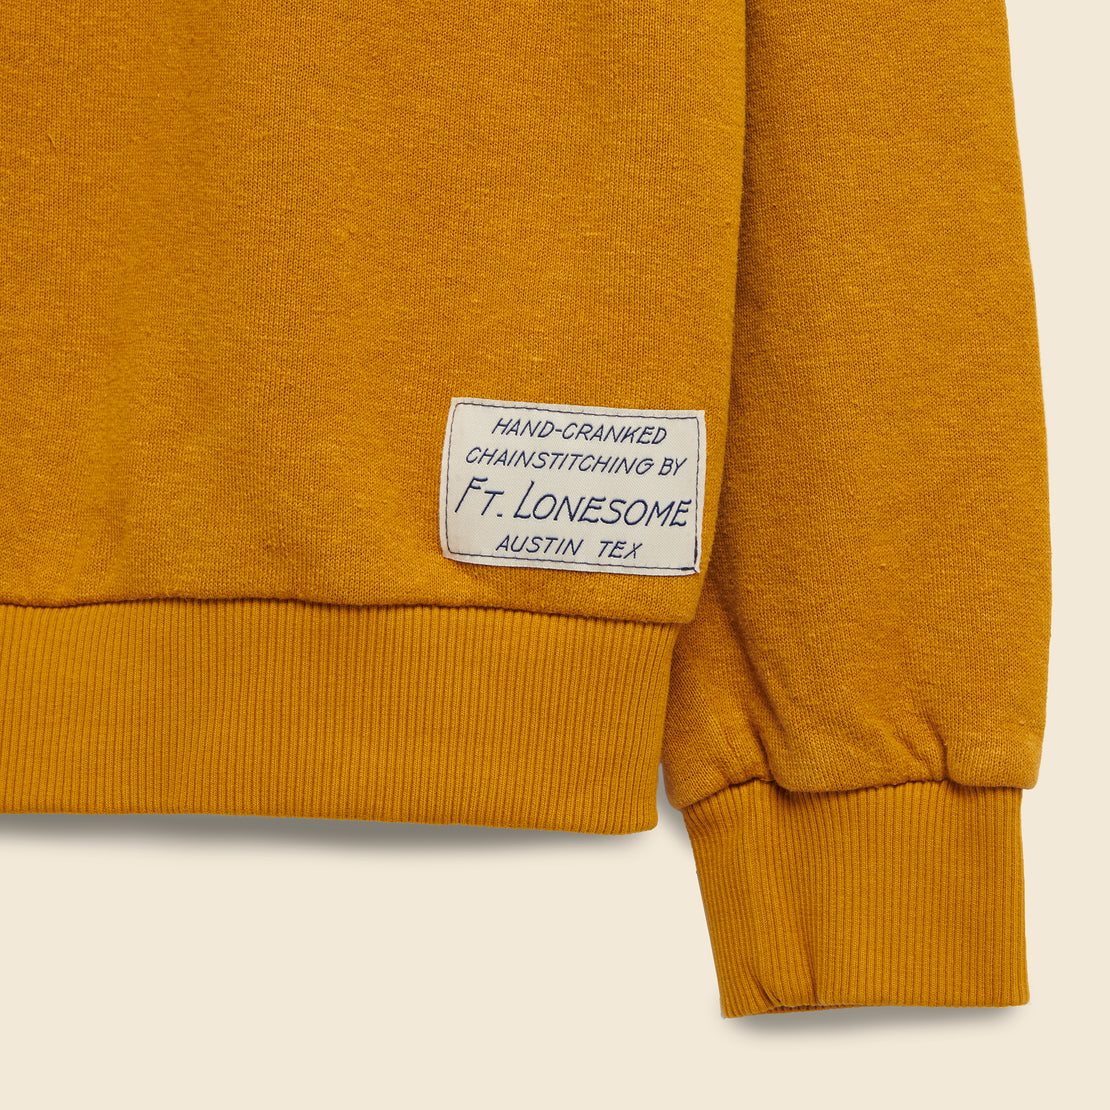 DAUGHTER Sweatshirt - Gold/Pink - Fort Lonesome - STAG Provisions - W - Tops - L/S Fleece